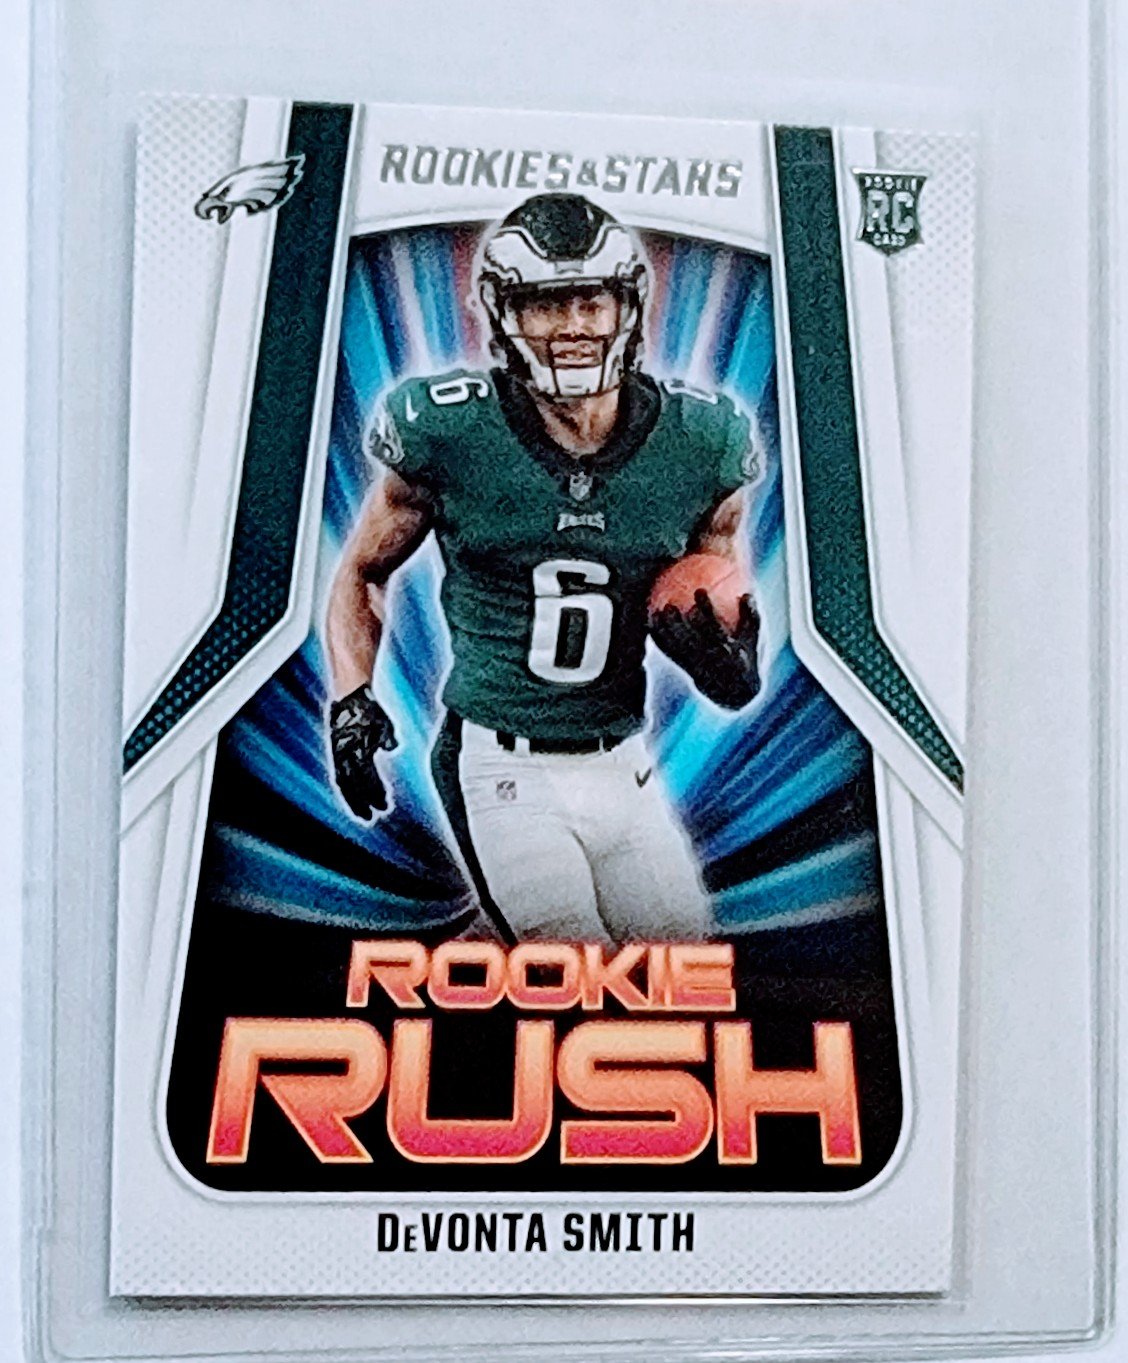 2021 Panini Rookies and Stars Devonta Smith Rookie Rush Insert Football Card AVM1 simple Xclusive Collectibles   